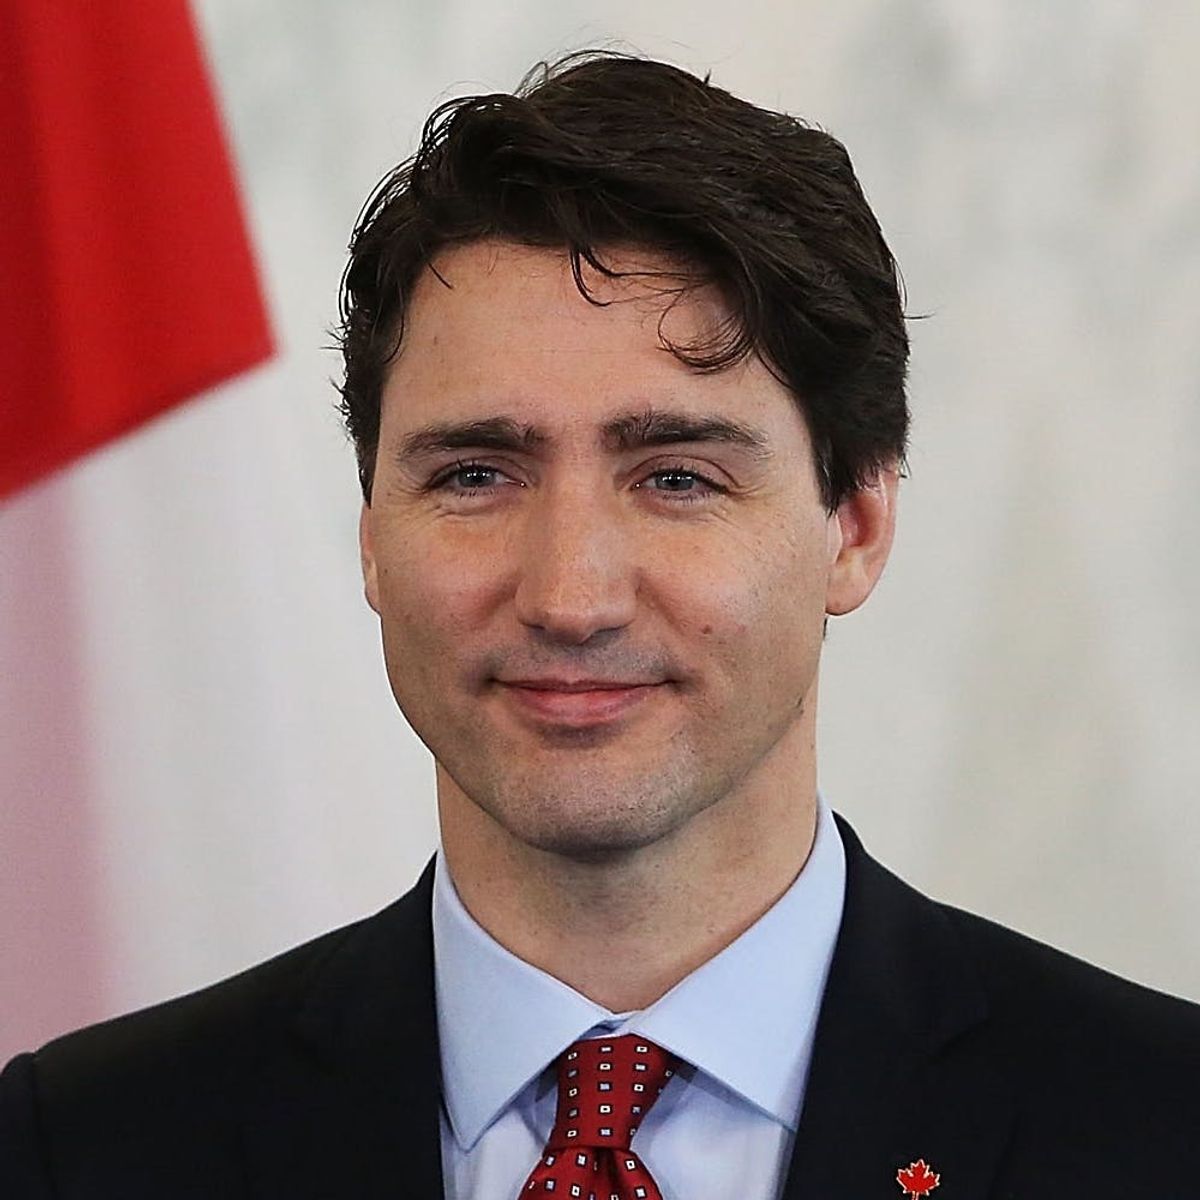 Justin Trudeau Has Sparked the Newest Baby Name Trend